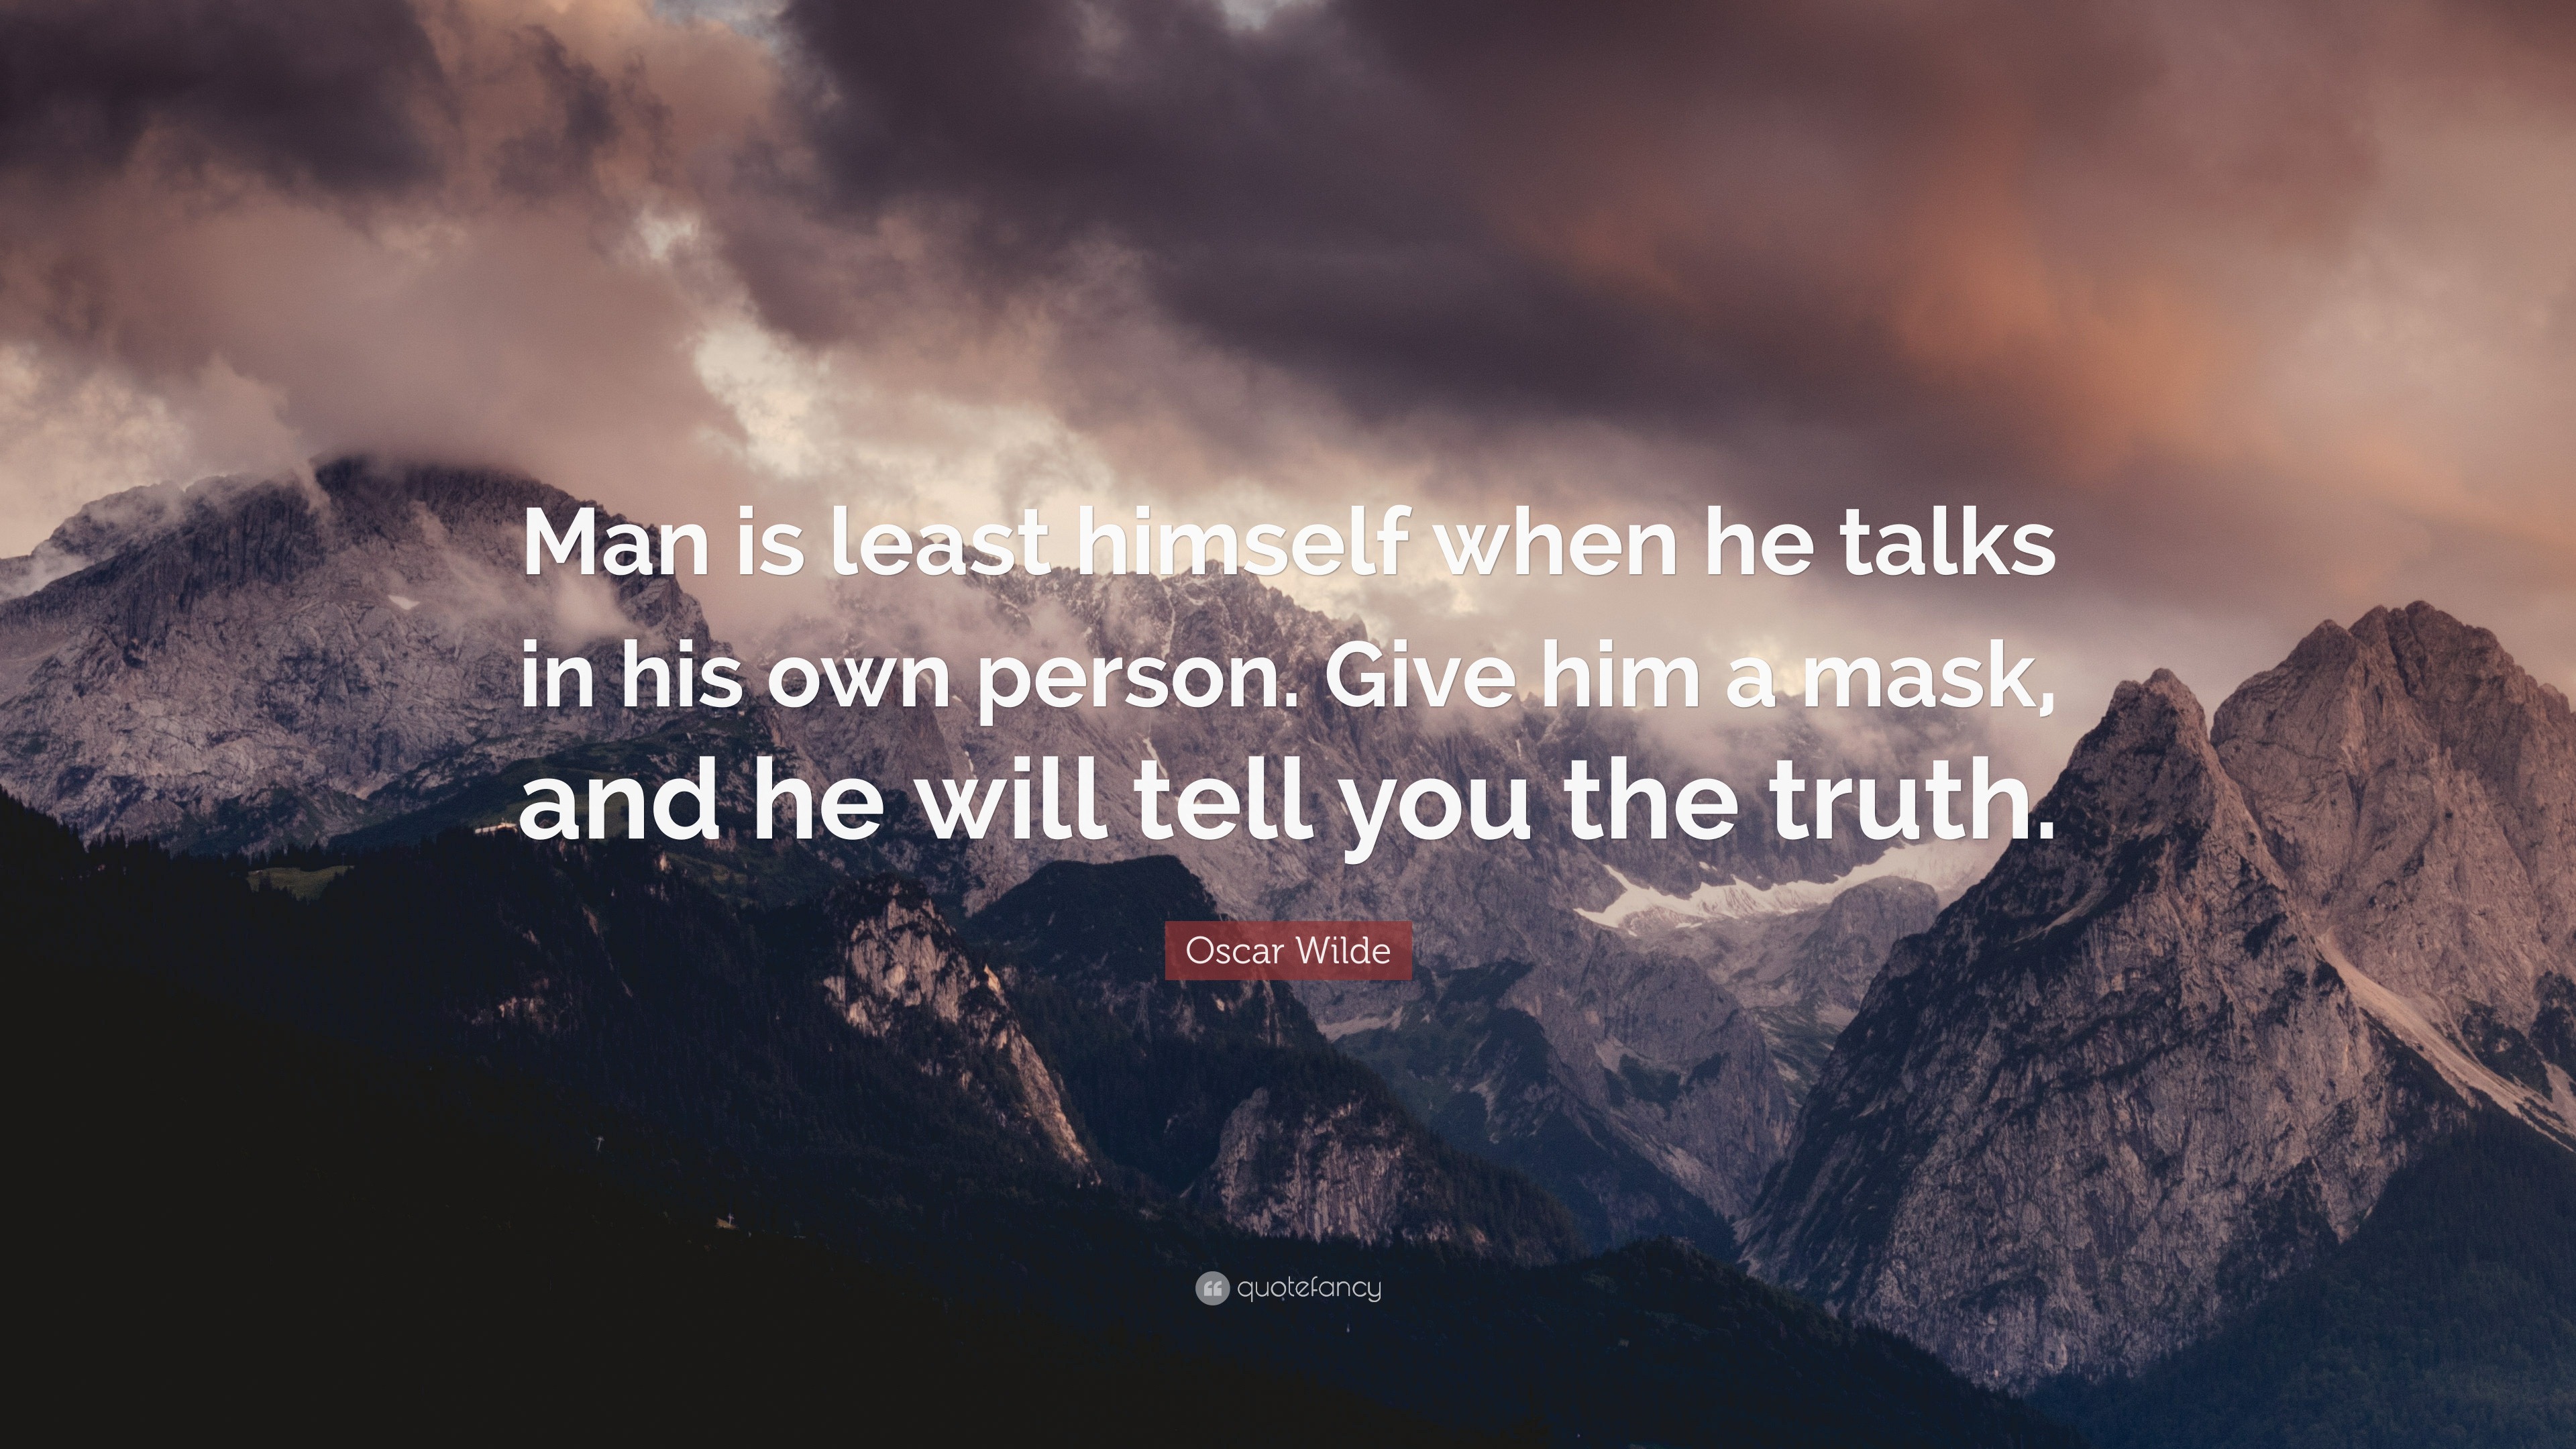 Oscar Wilde Quote: "Man is least himself when he talks in his own person. Give him a mask, and ...